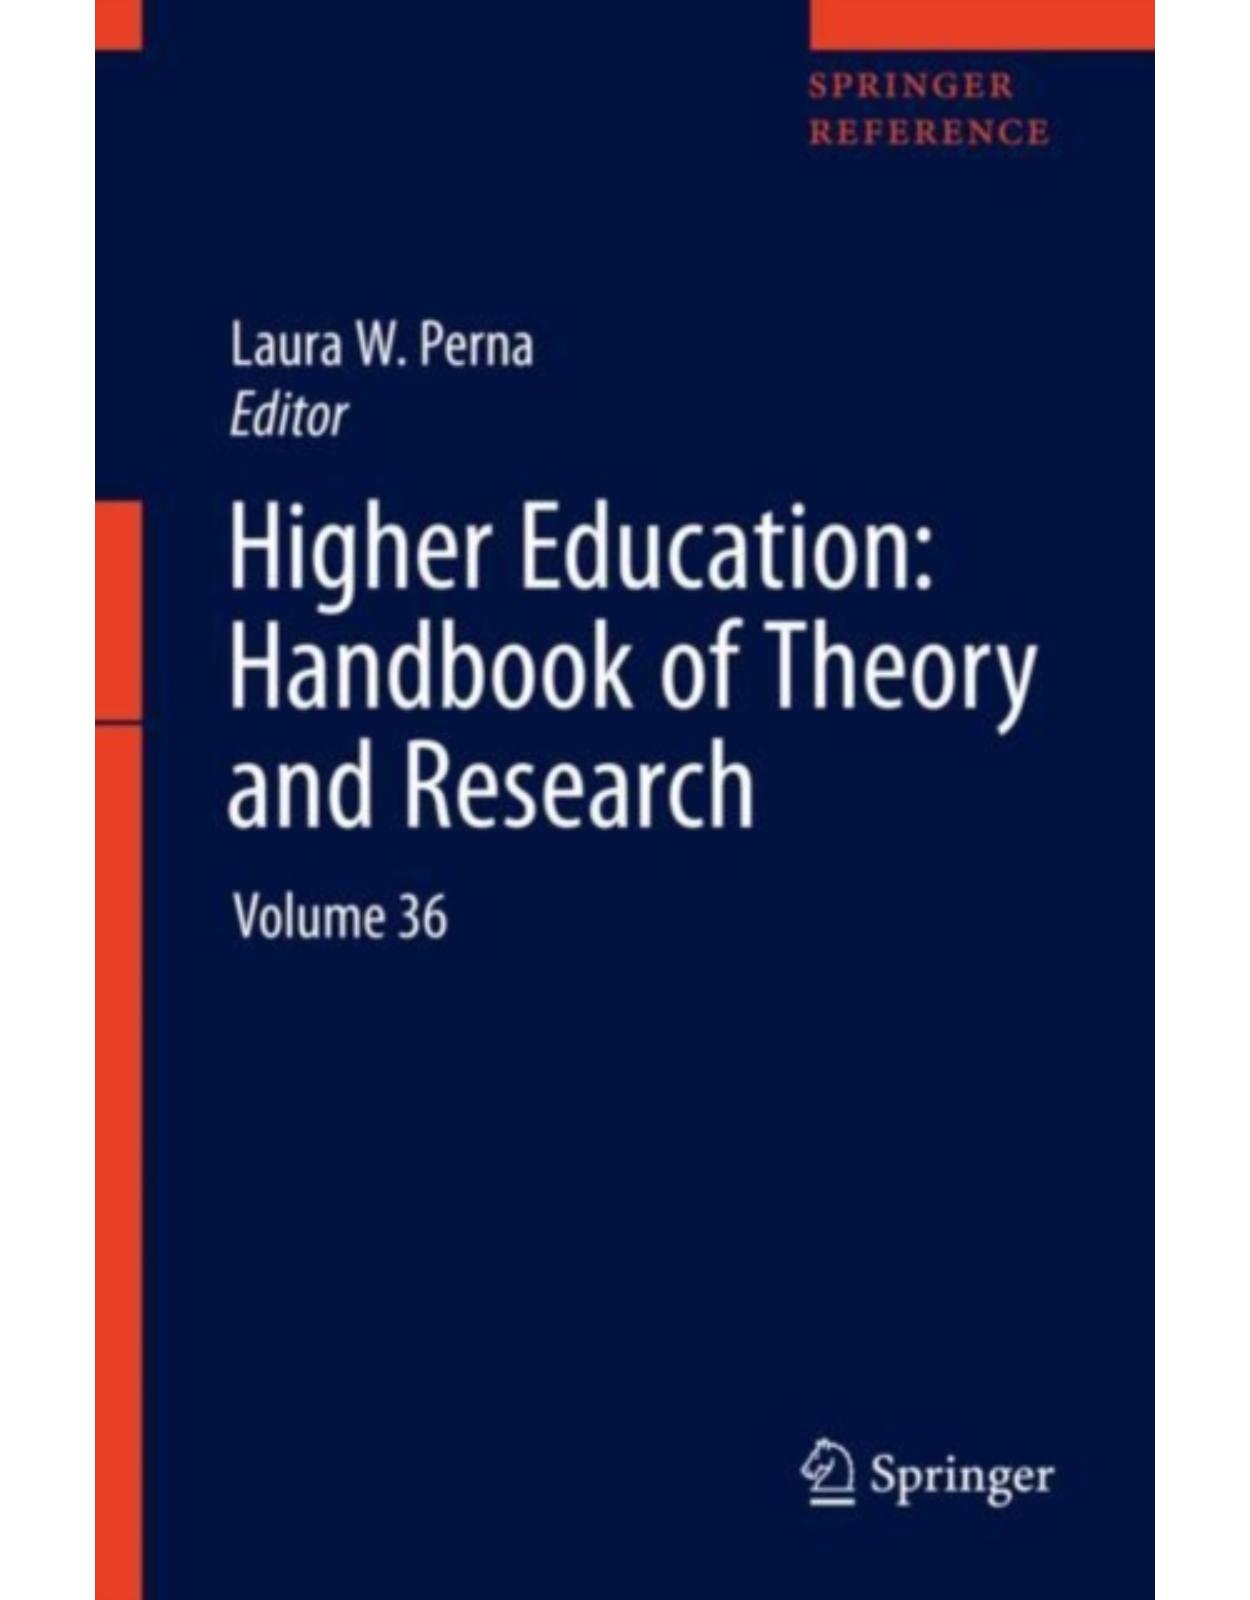 Higher Education: Handbook of Theory and Research: Volume 36